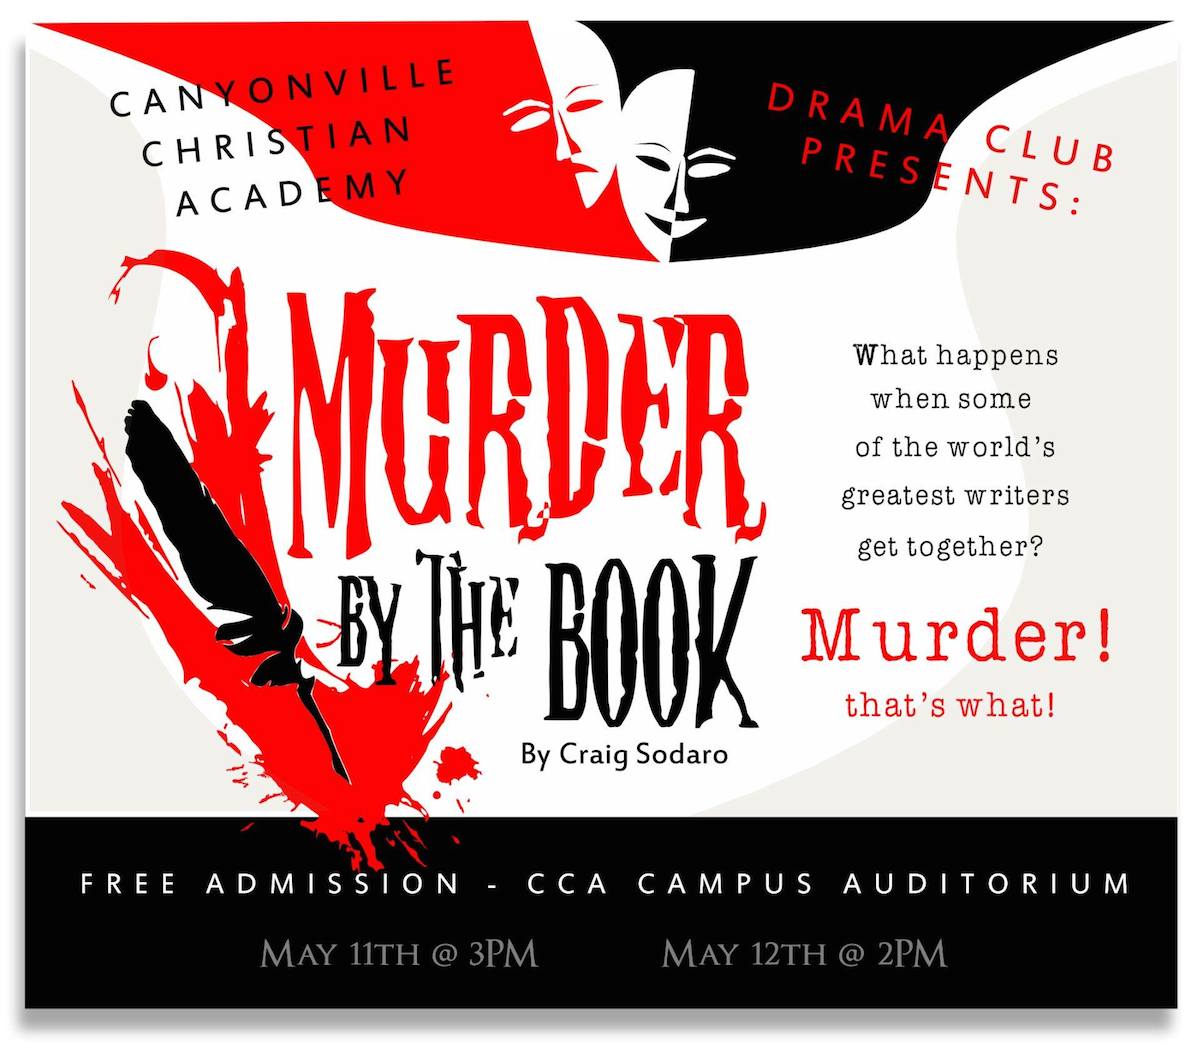 canyonville christian academy, drama club, spring play, murder by the book